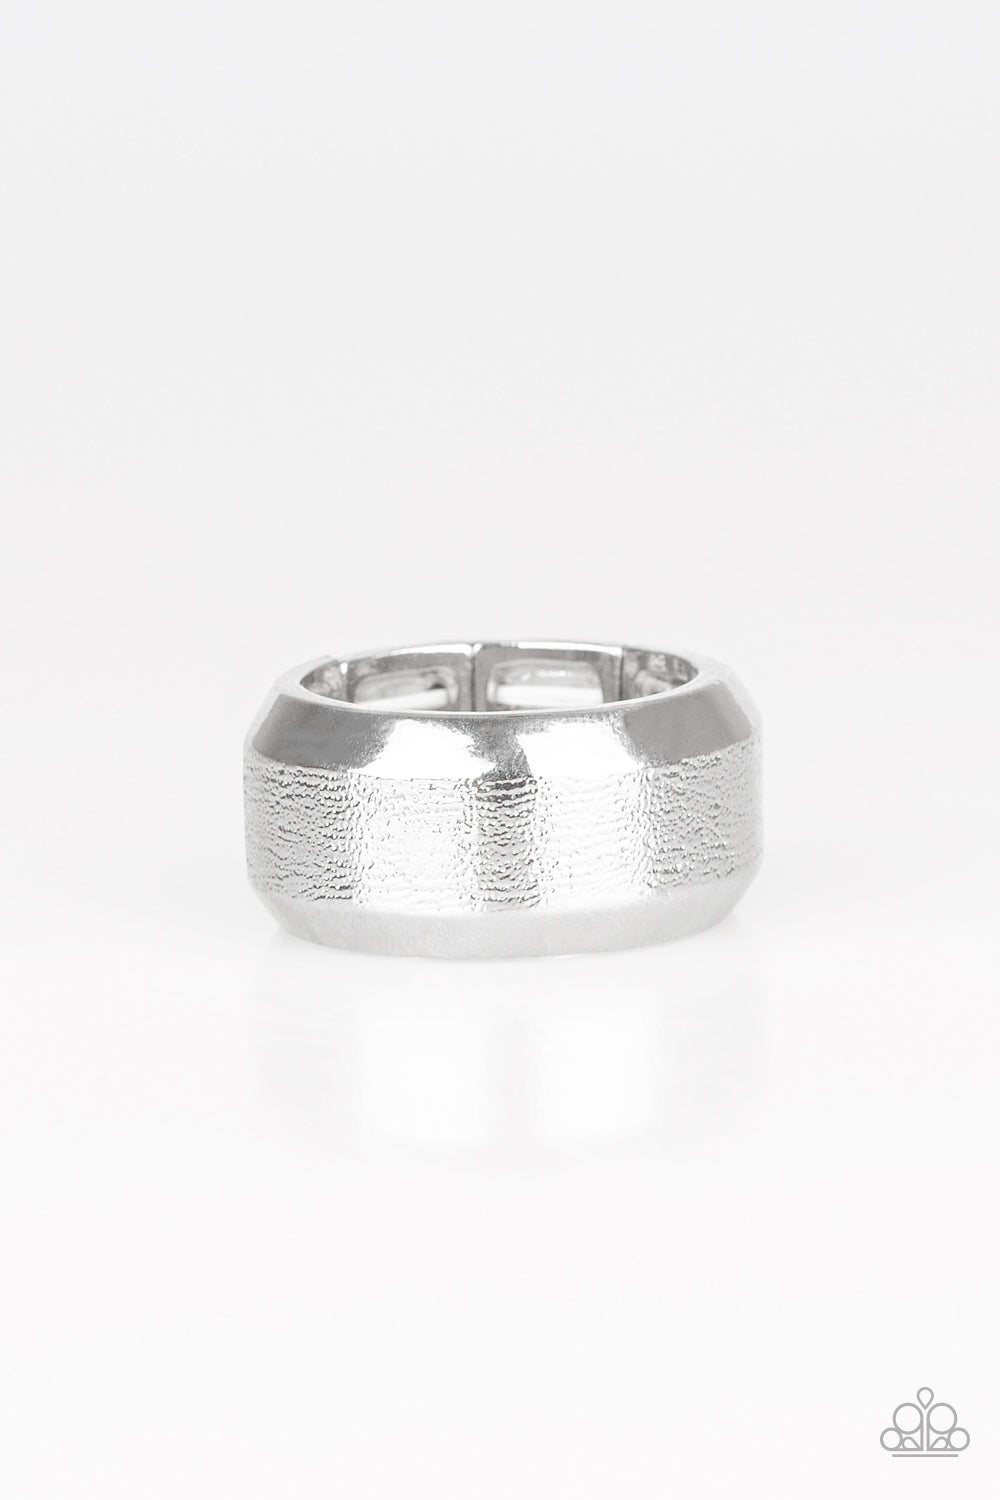 Checkmate - Silver Band Men's Collection 2019 One Life Convention Paparazzi Jewelry Ring  The center of a beveled silver band has been delicately hammered in shimmery detail for a metro inspired look. Features a stretchy band for a flexible fit.  Sold as one individual ring.